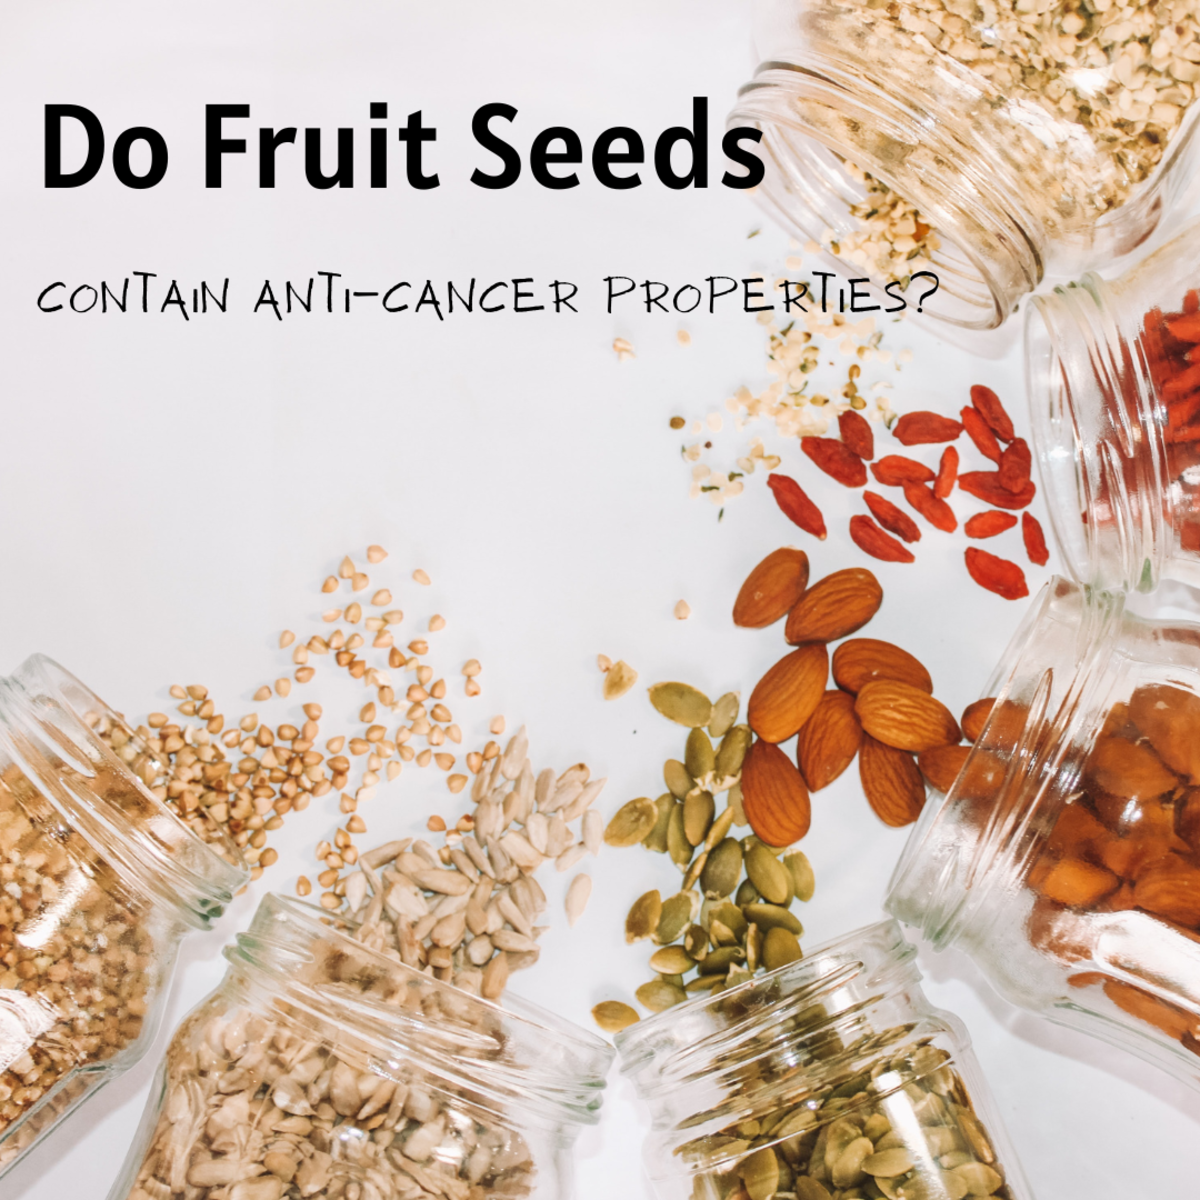 Fruit Seeds May Contain Anticancer Properties